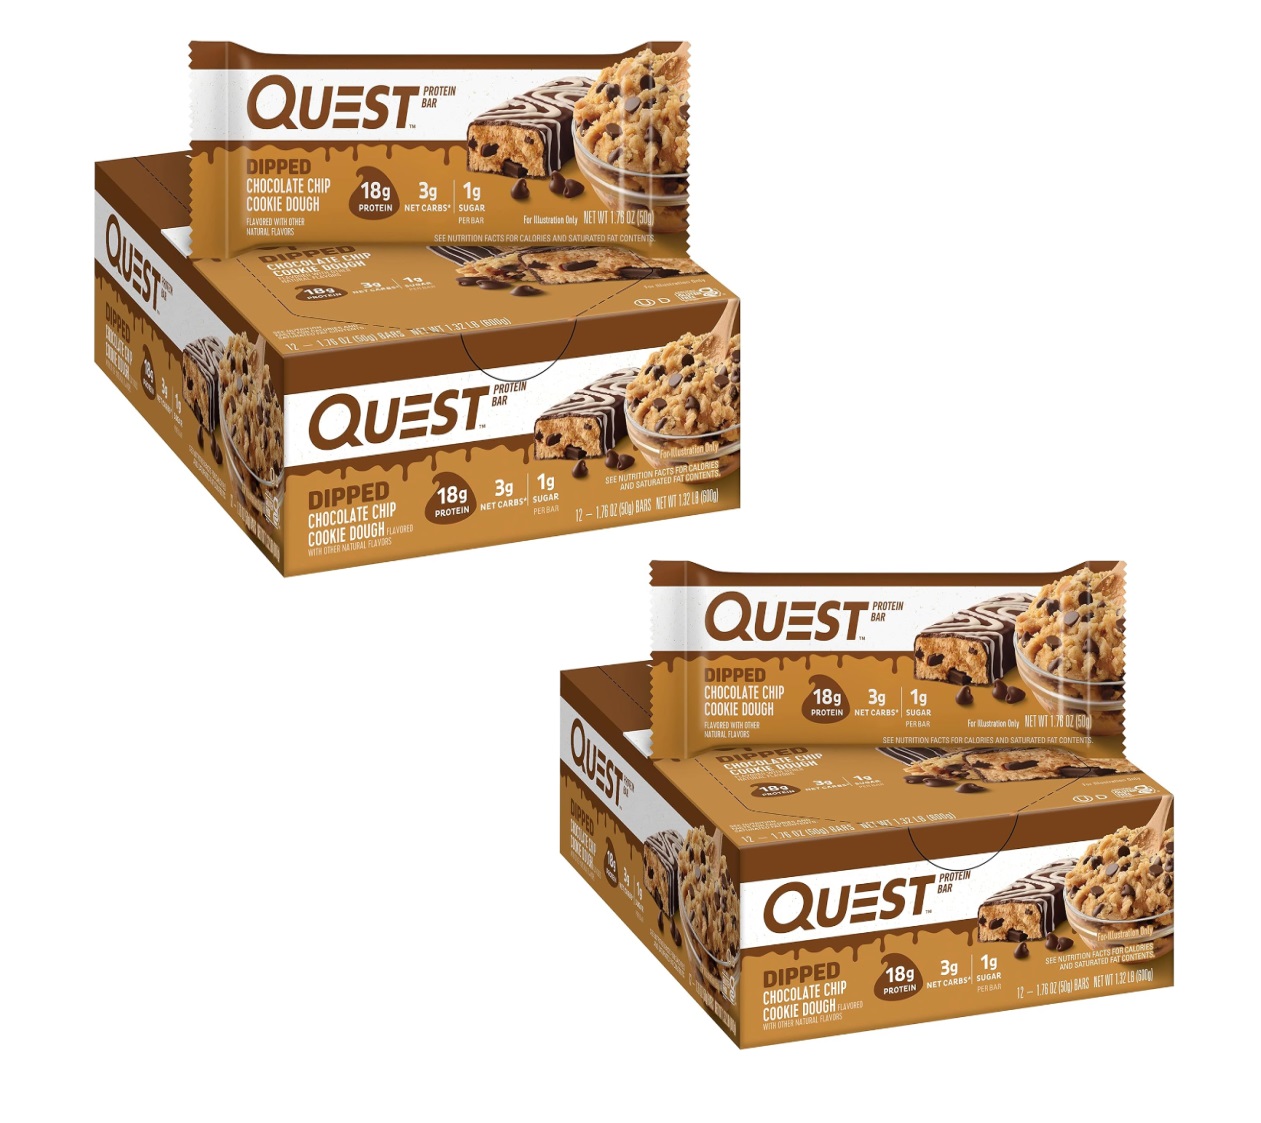 24-Count 1.76-Oz Quest Nutrition Protein Bars (Chocolate Chip Cookie Dough) $40.70 +$10 Amazon Credit w/ S&S + Free Shipping